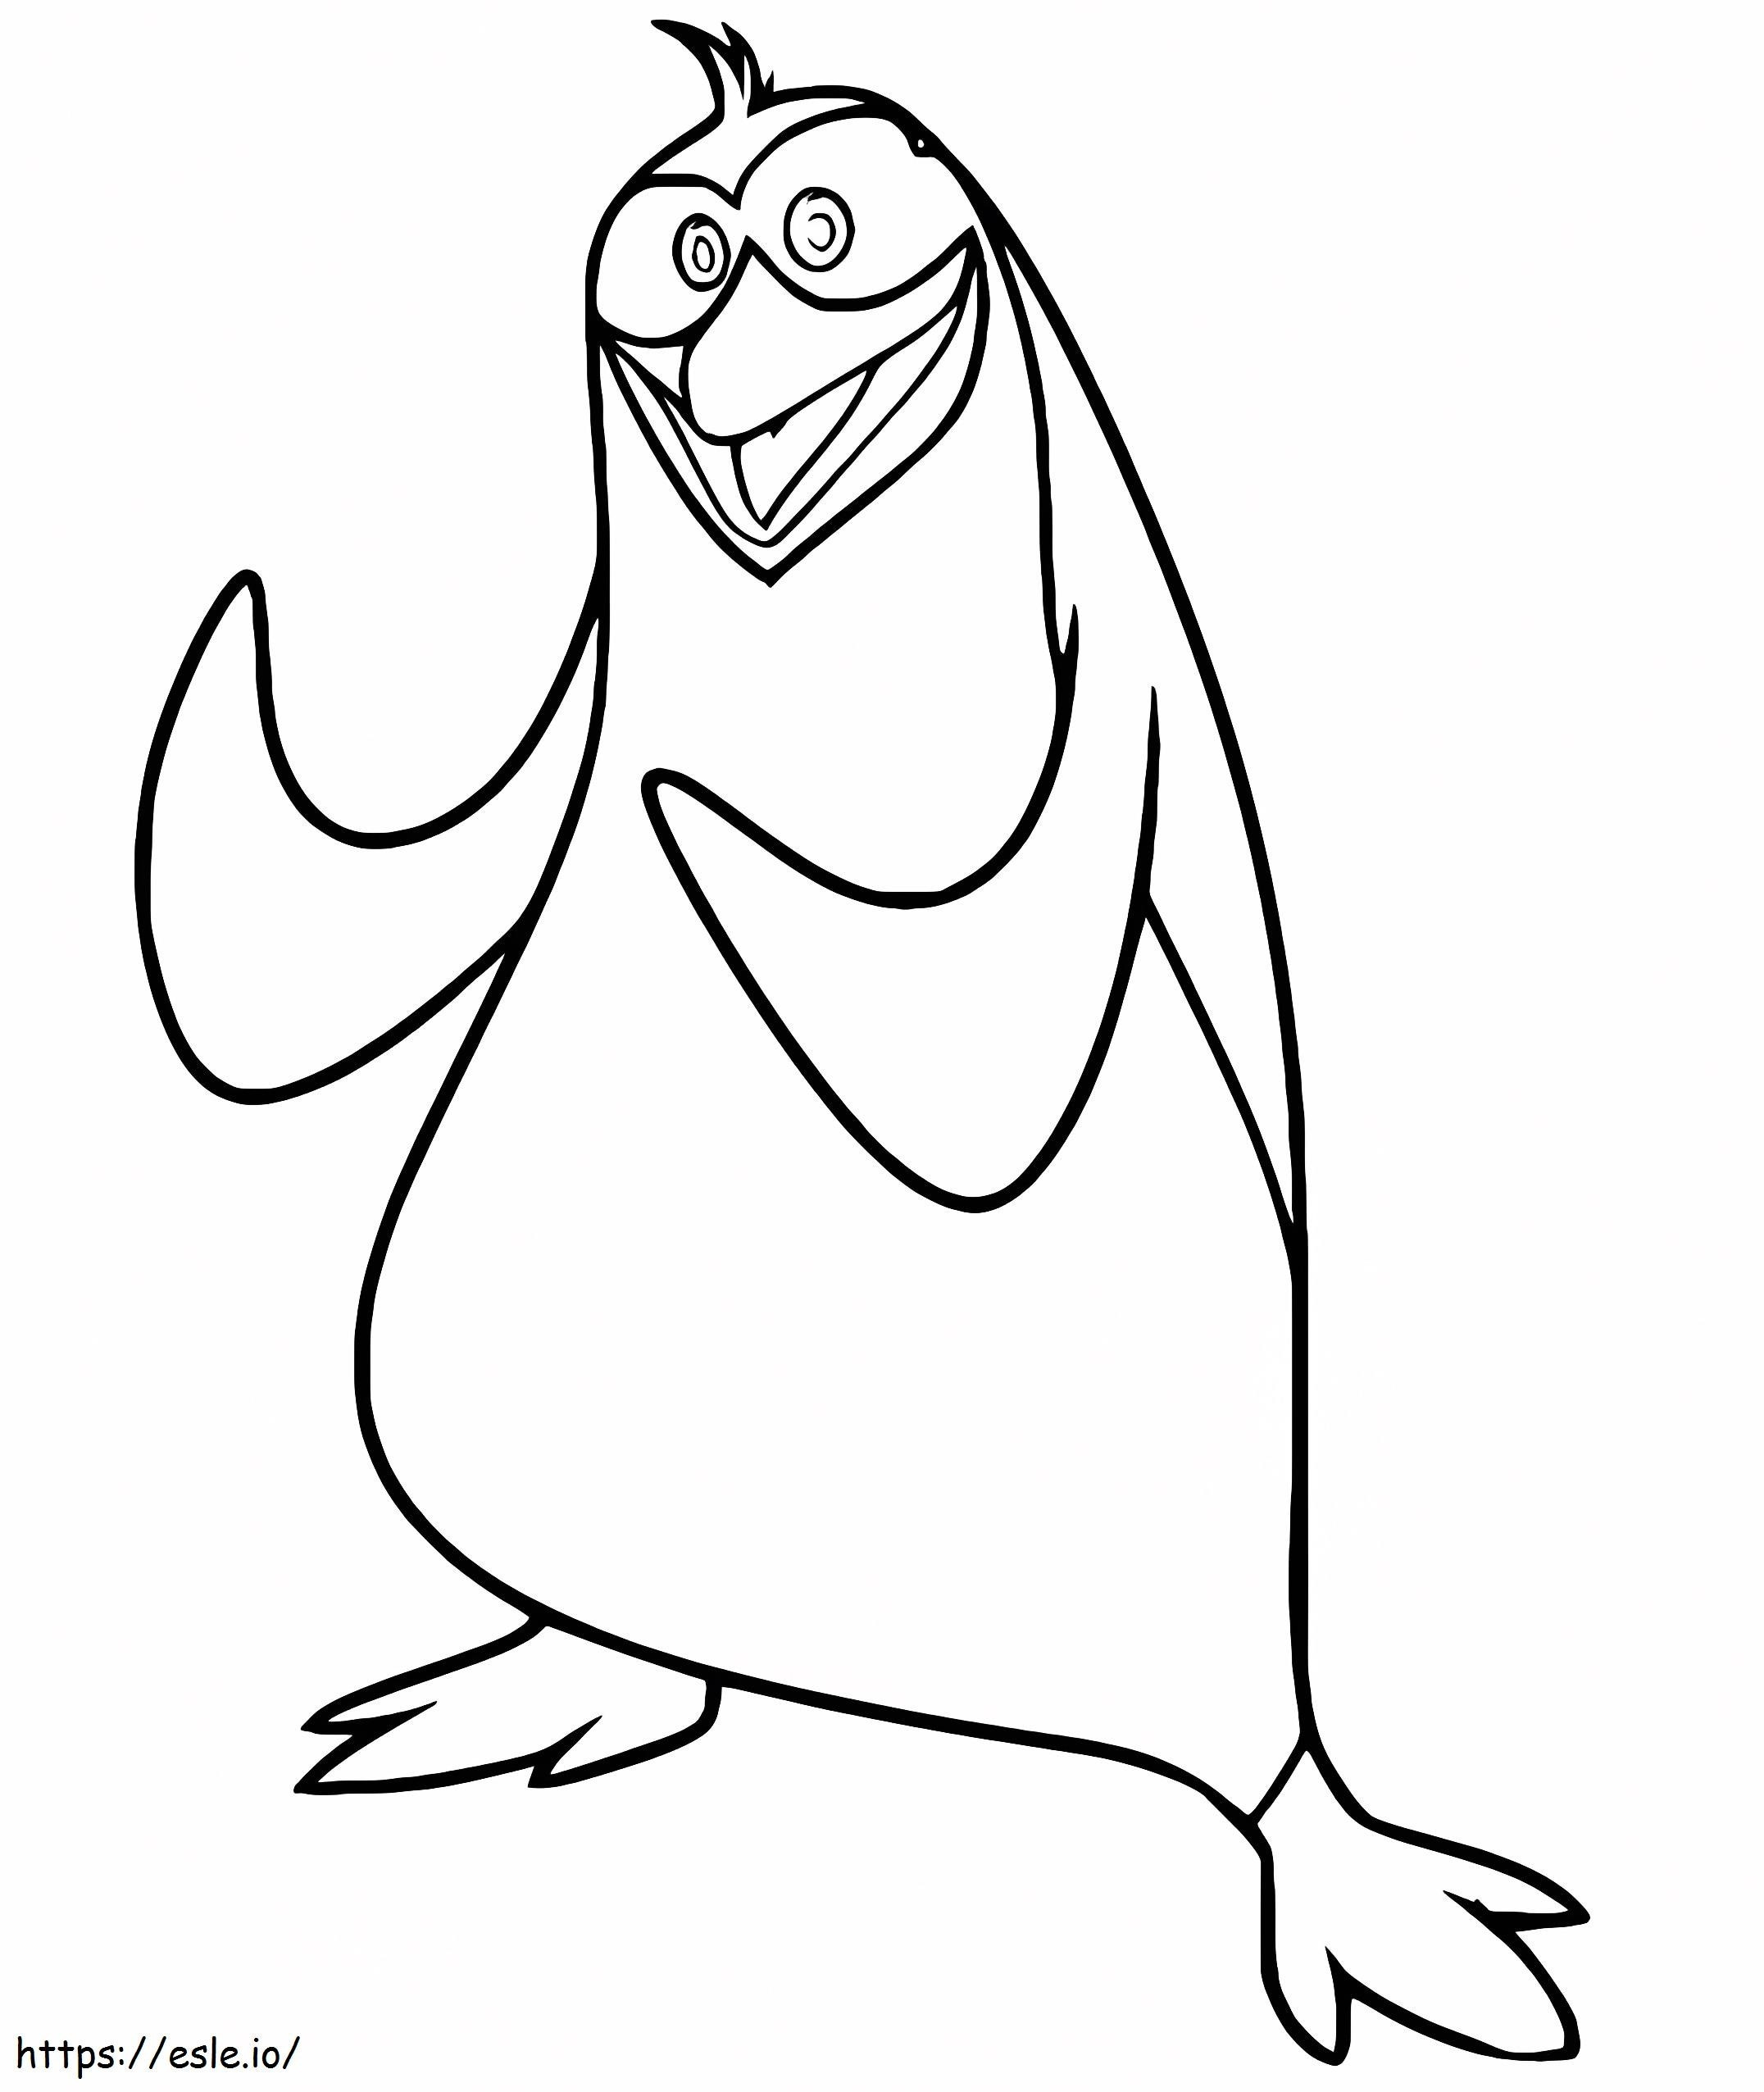 Rico In Penguins Of Madagascar coloring page